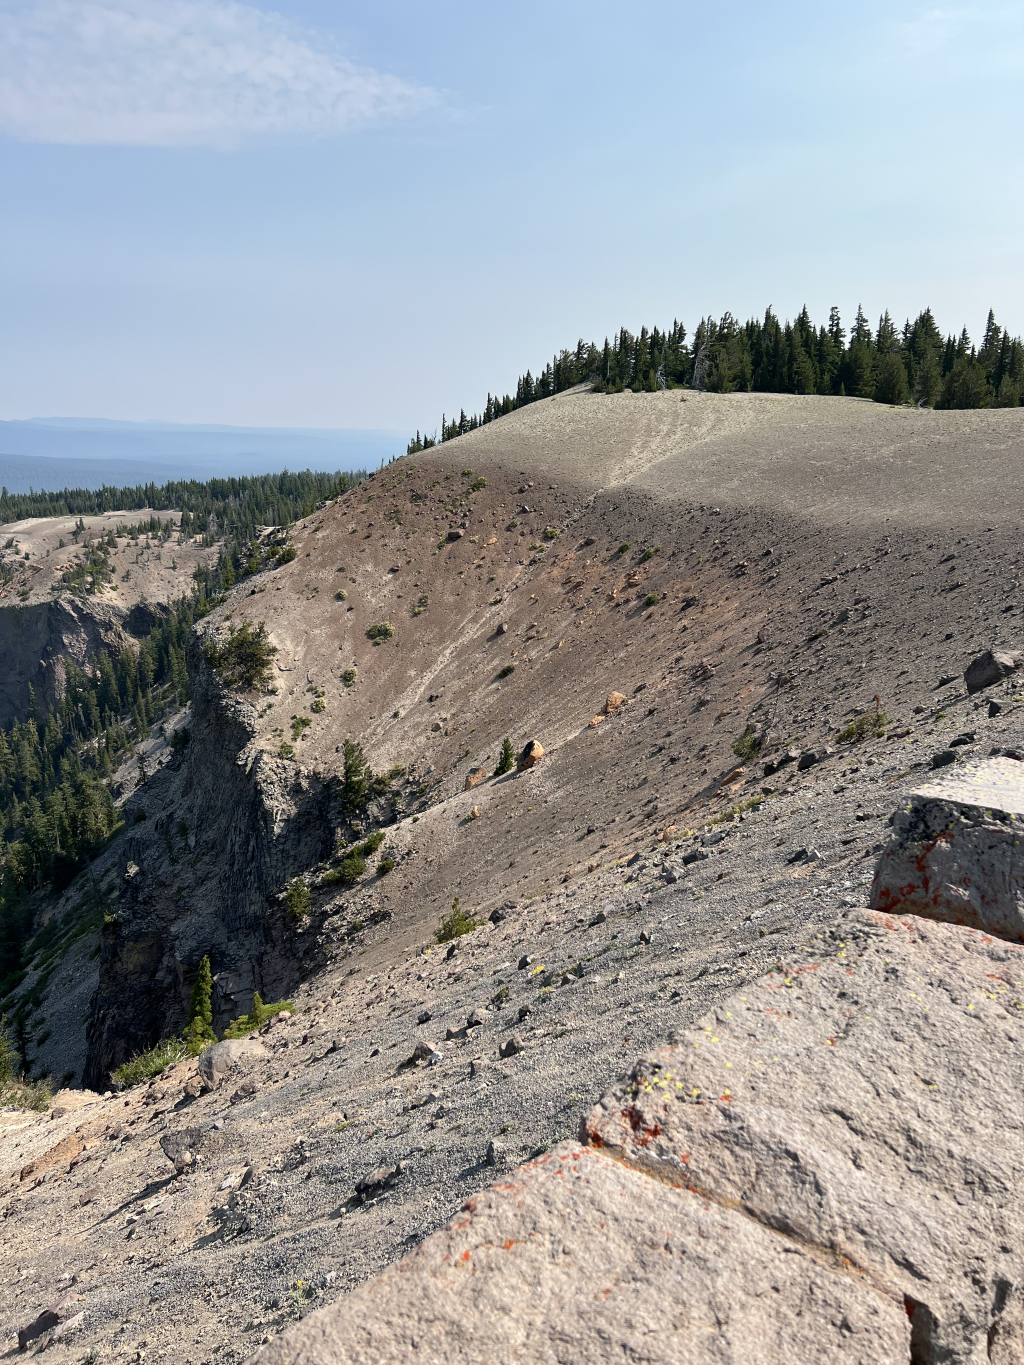  This escarpment clearly shows all the phases of the climactic eruption. The central vent erupted first, so the buff layer at the bottom came from this vent. The welded orange tuff above that is the Wineglass Welded Tuff from the pyroclastic flows at